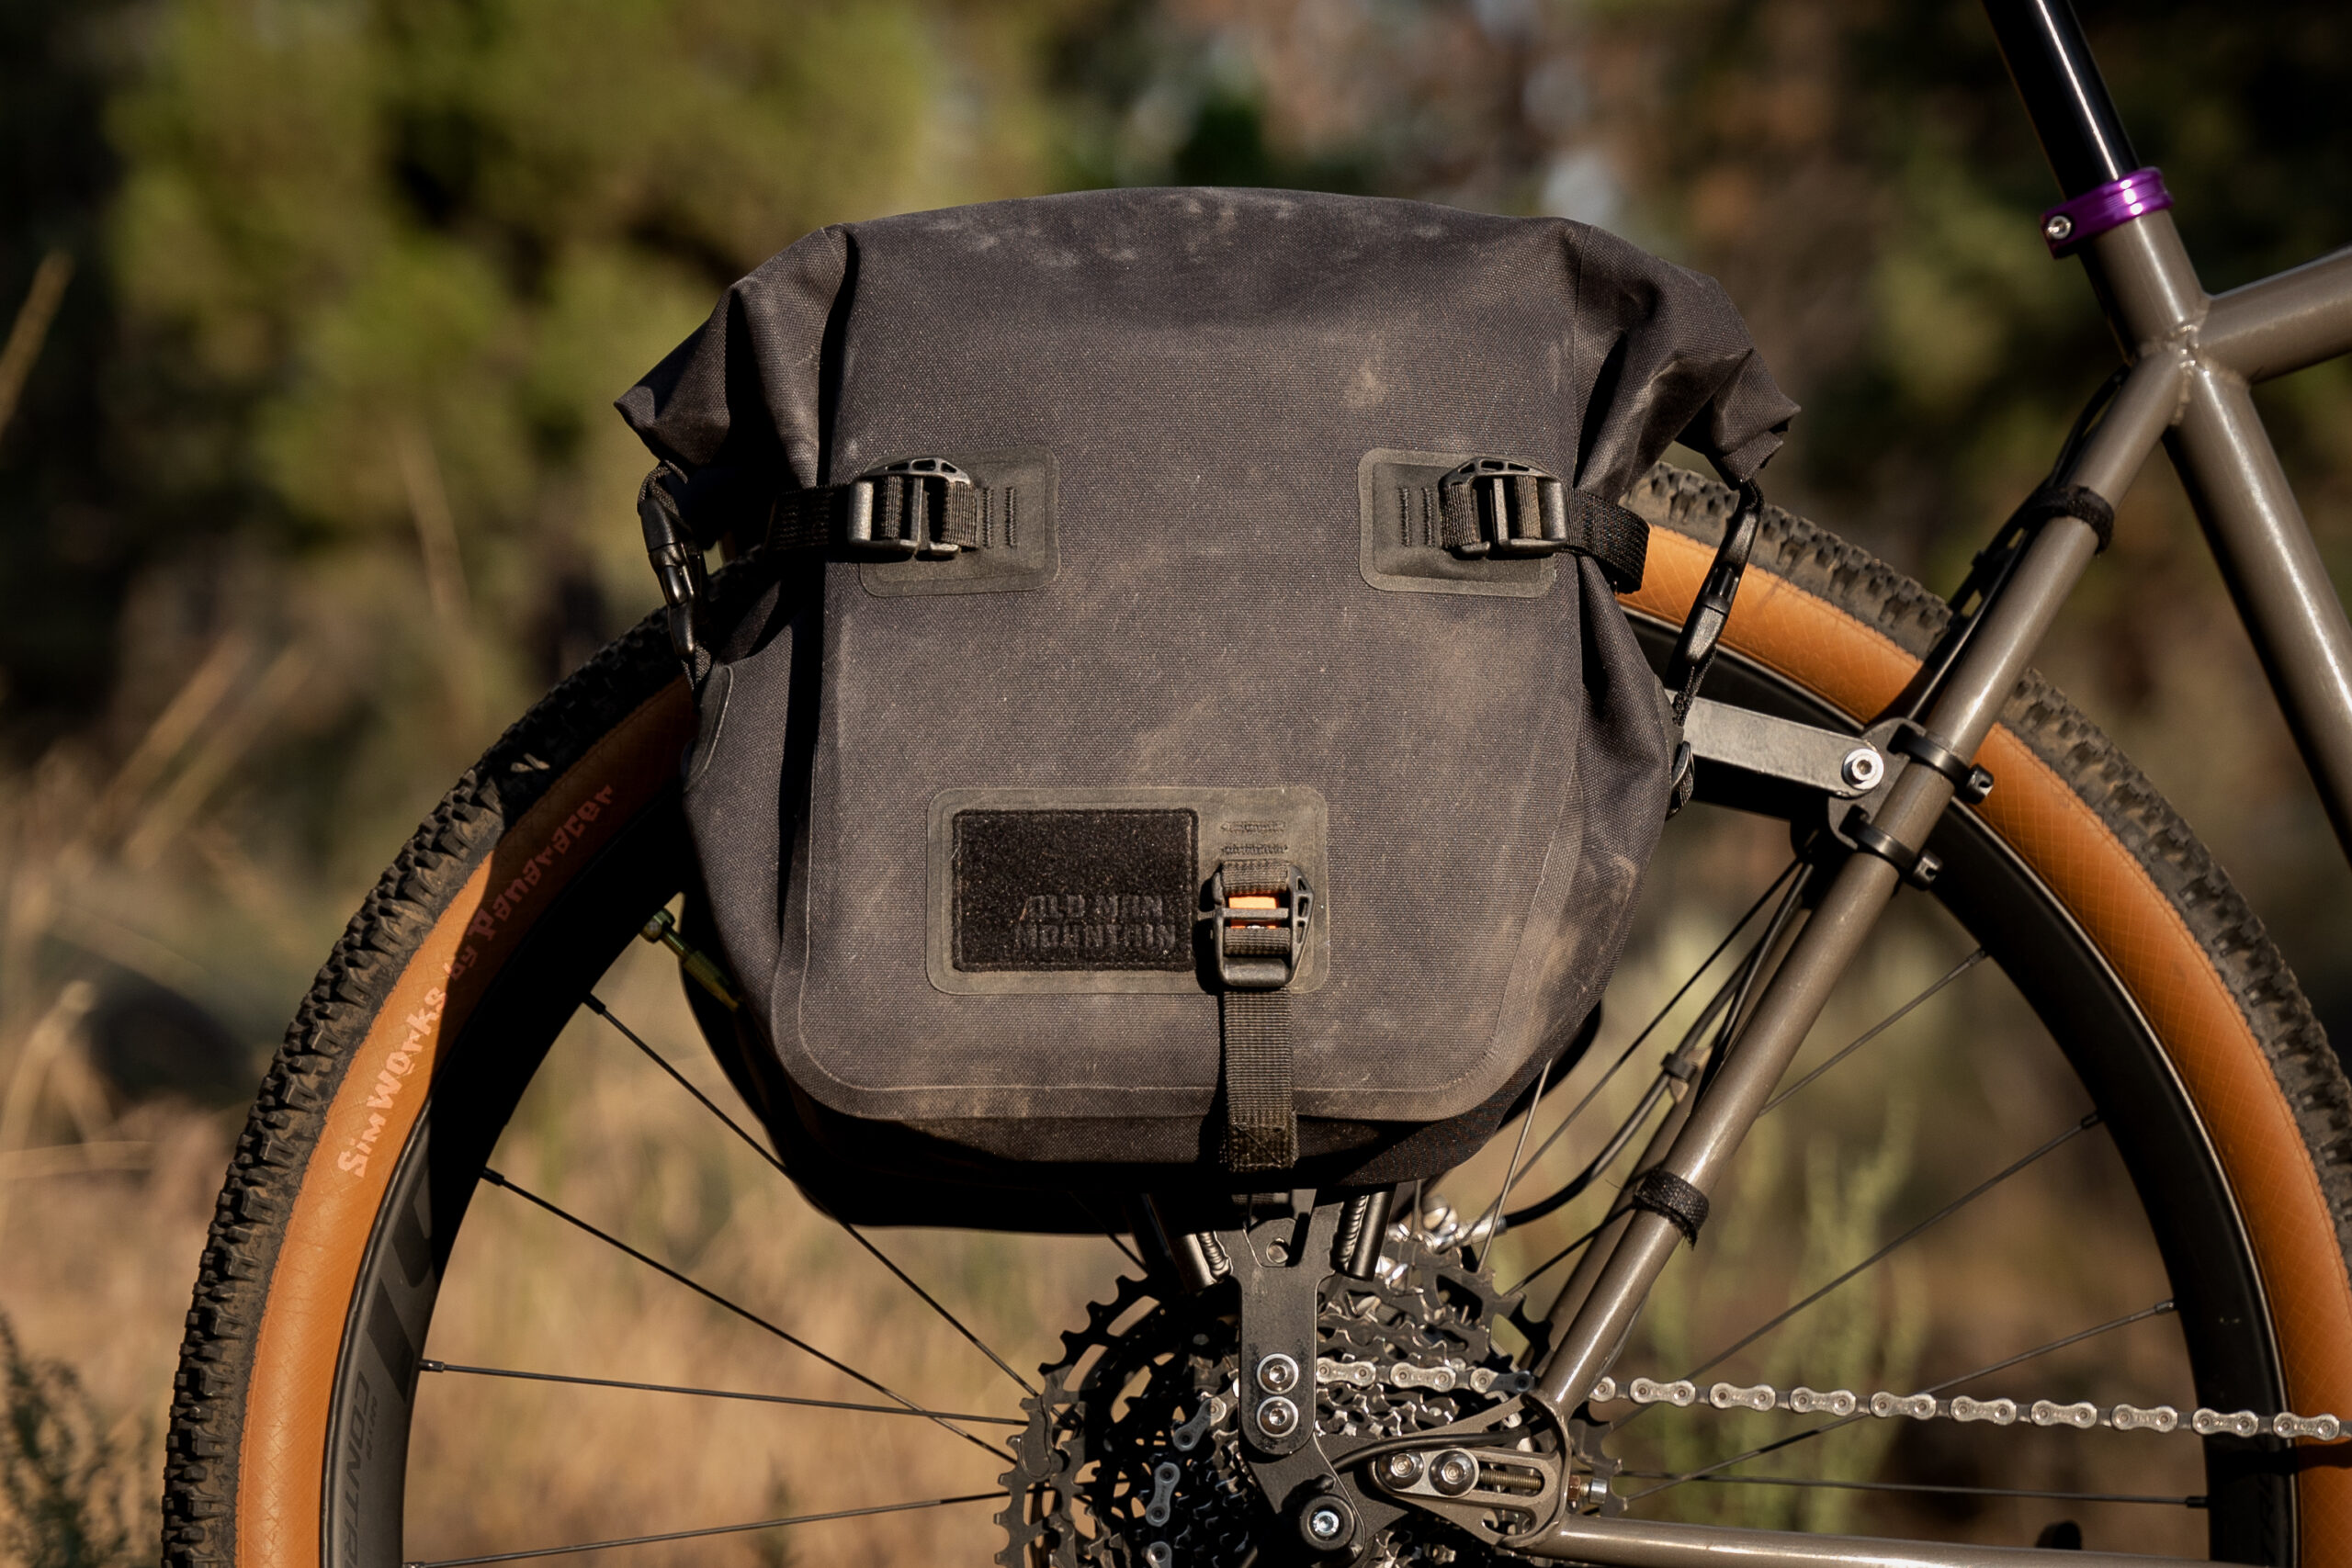 Old Man Mountain Ponderosa Pannier, a waterproof panner mounted on a Divide Rack.